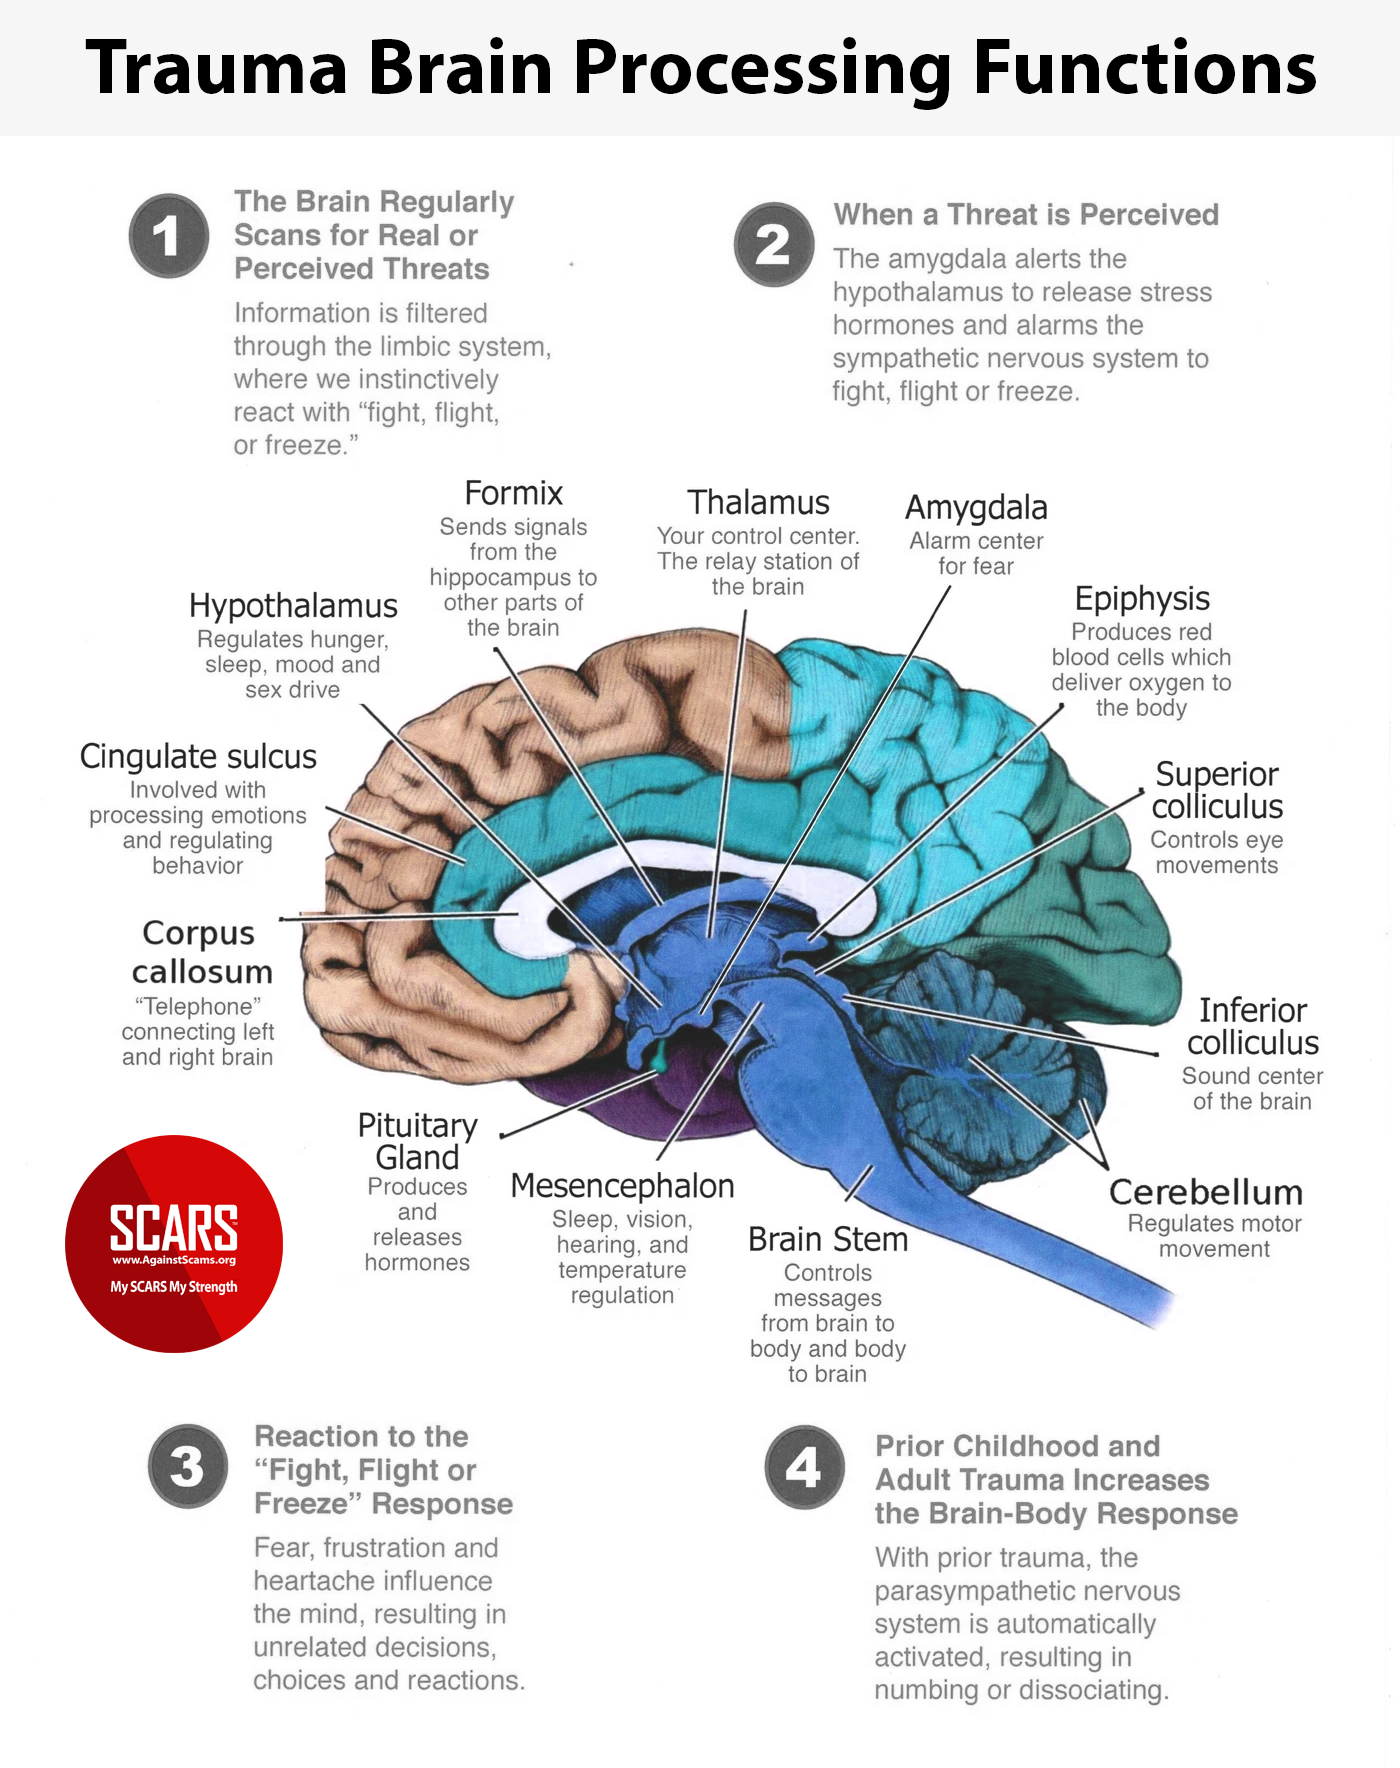 Trauma - Brain Processing Functions - Infographic 83